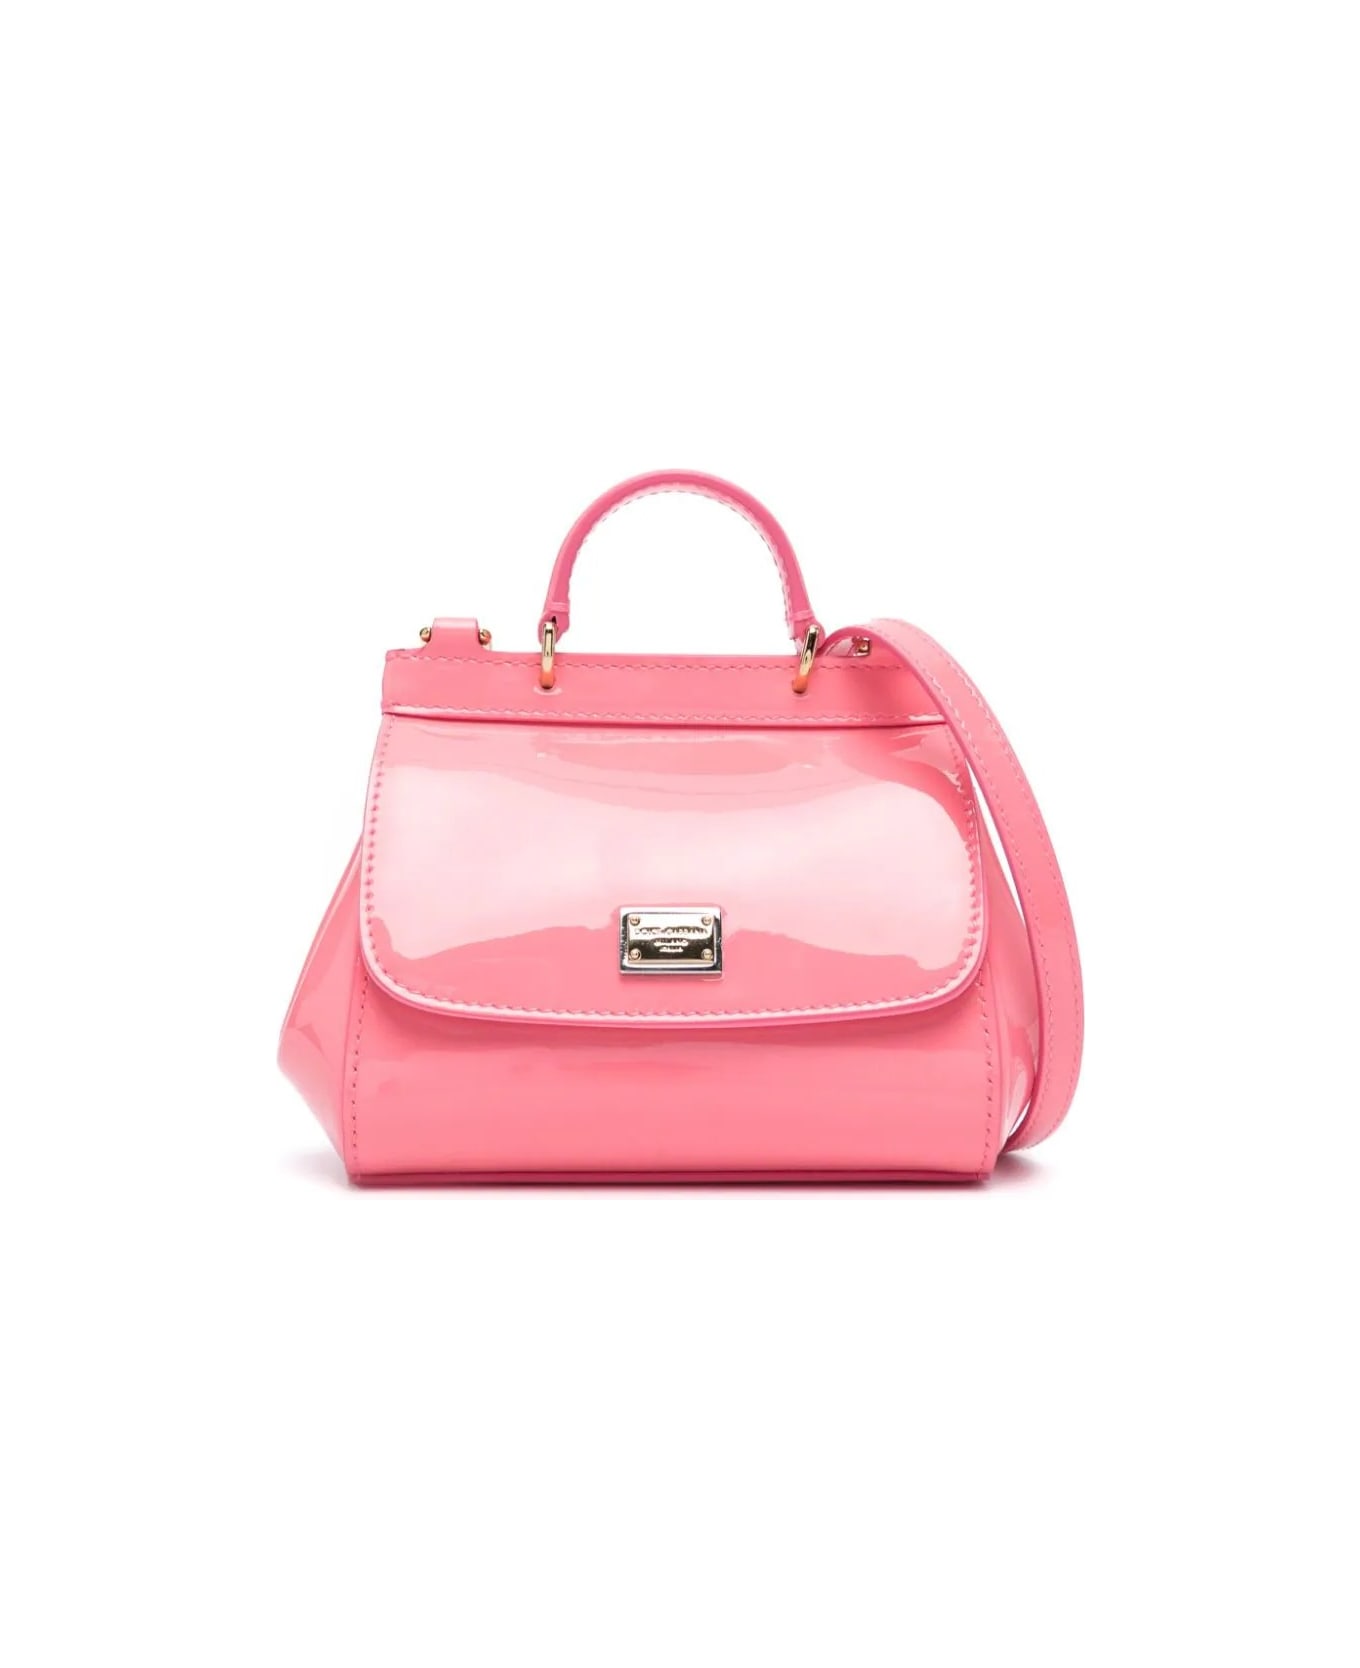 Dolce & Gabbana Mini Sicily Bag In Pink Patent Leather - Pink アクセサリー＆ギフト